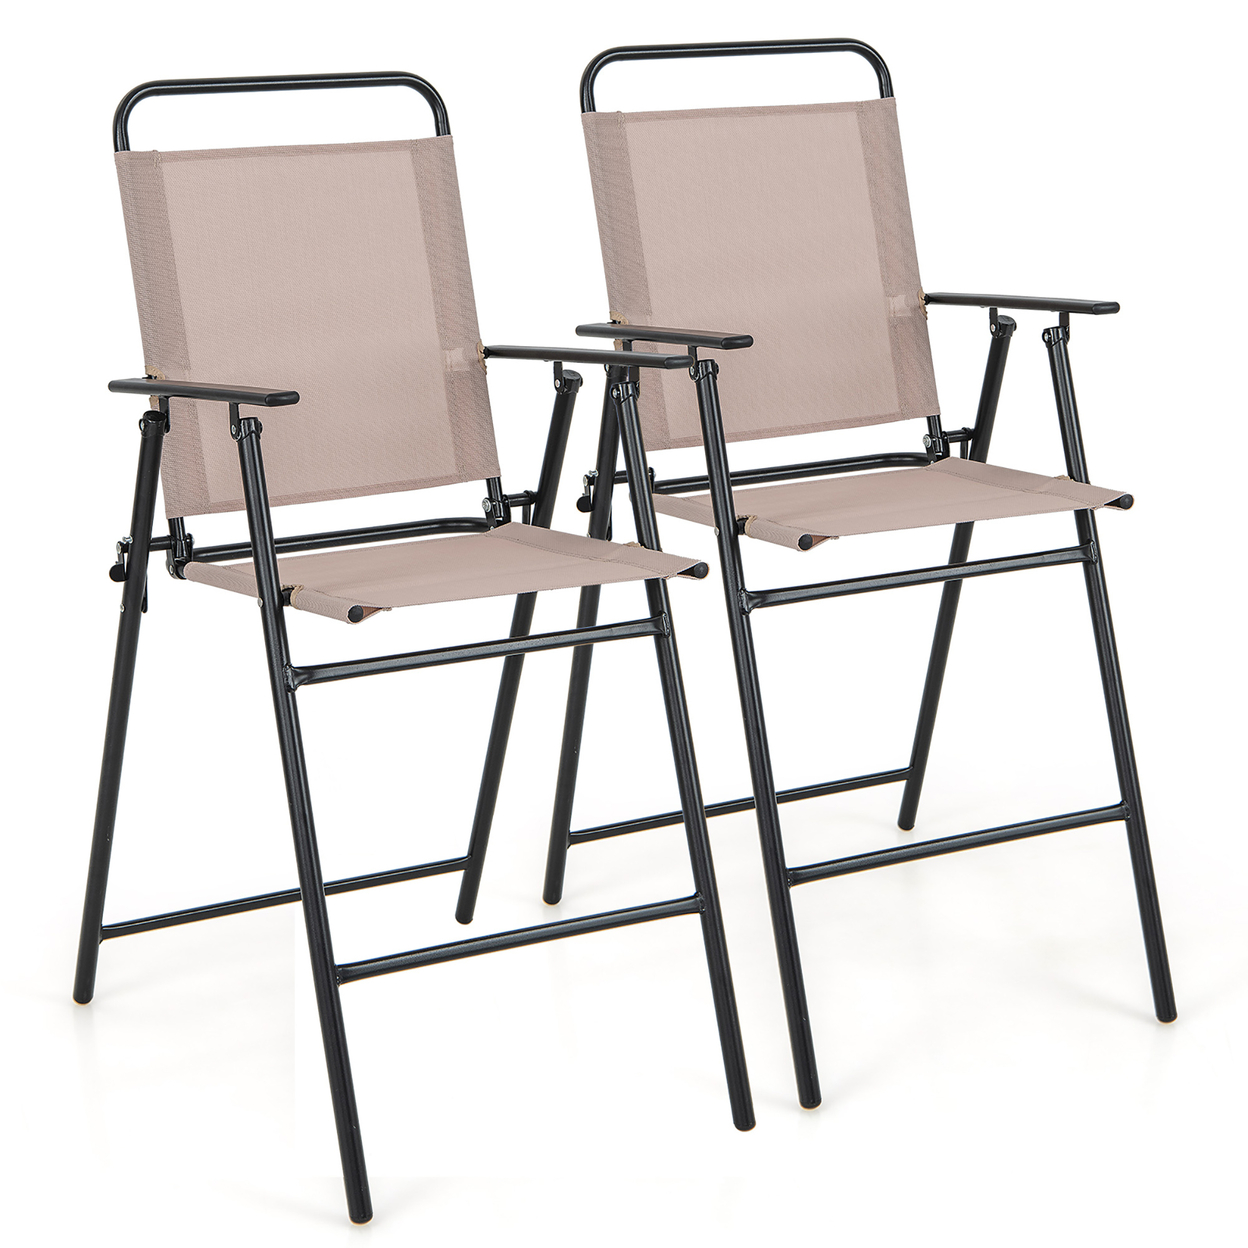 Outdoor Folding Bar Chair Set Of 2 Patio Dining Chairs W/ Breathable Fabric